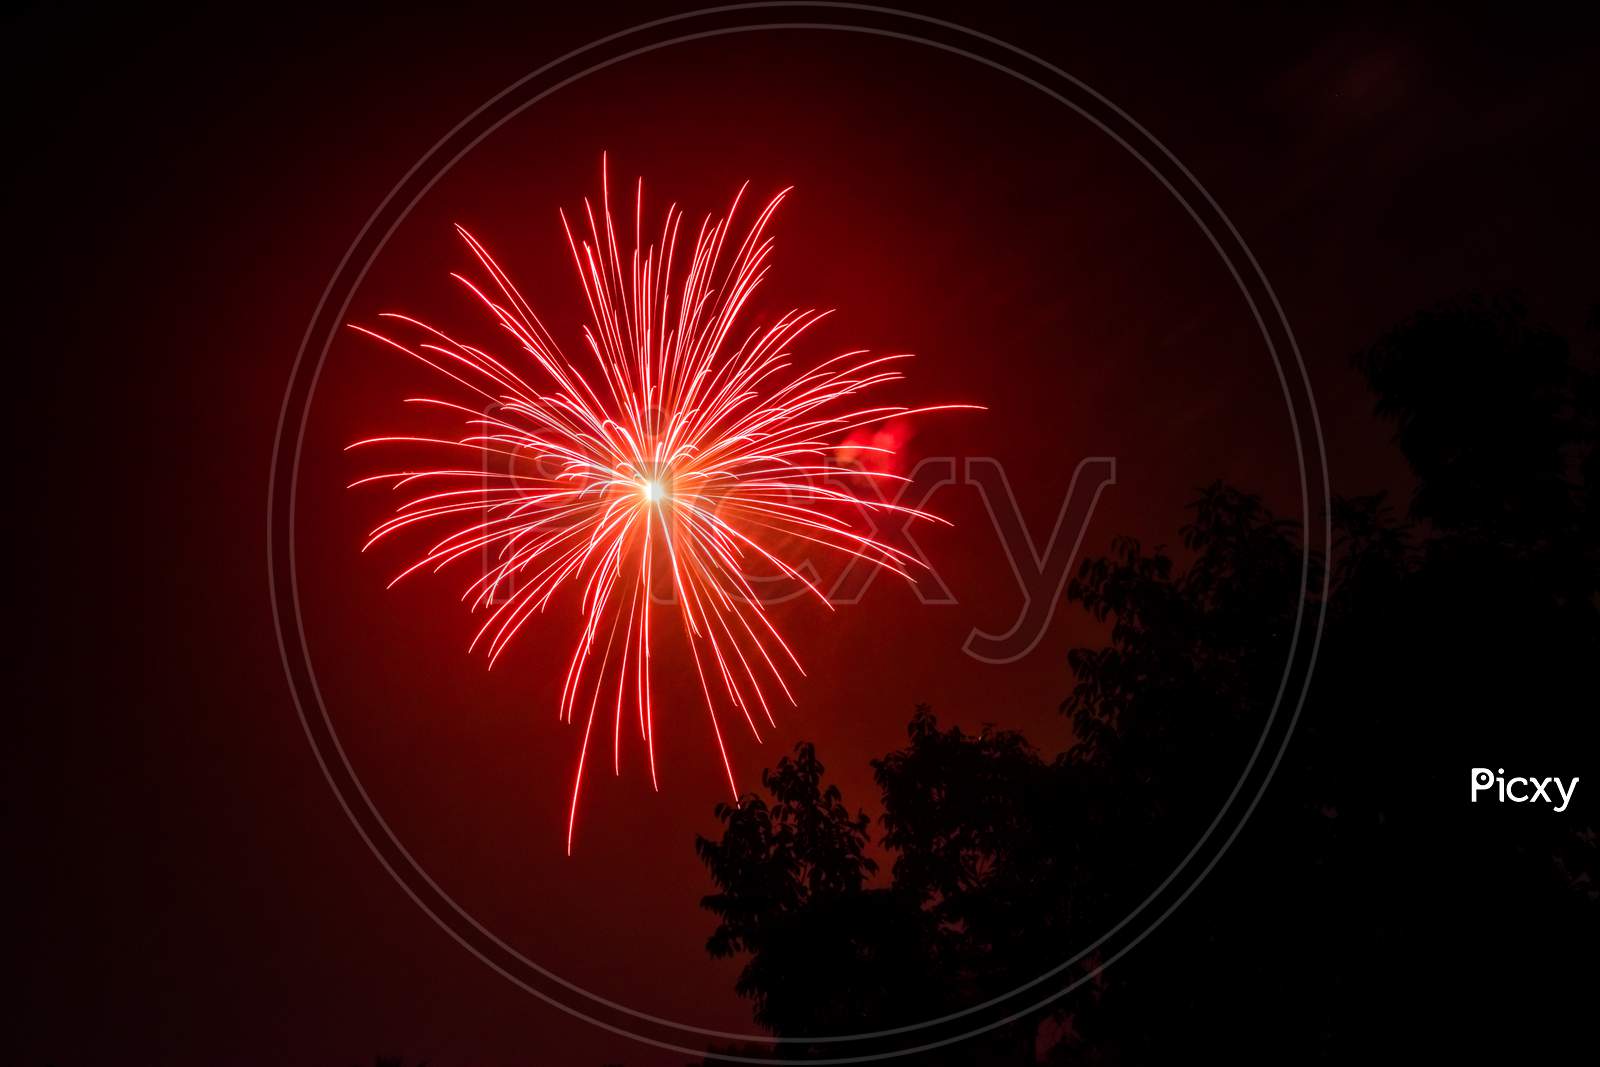 Red Fireworks At Night Sky With Visible Trees